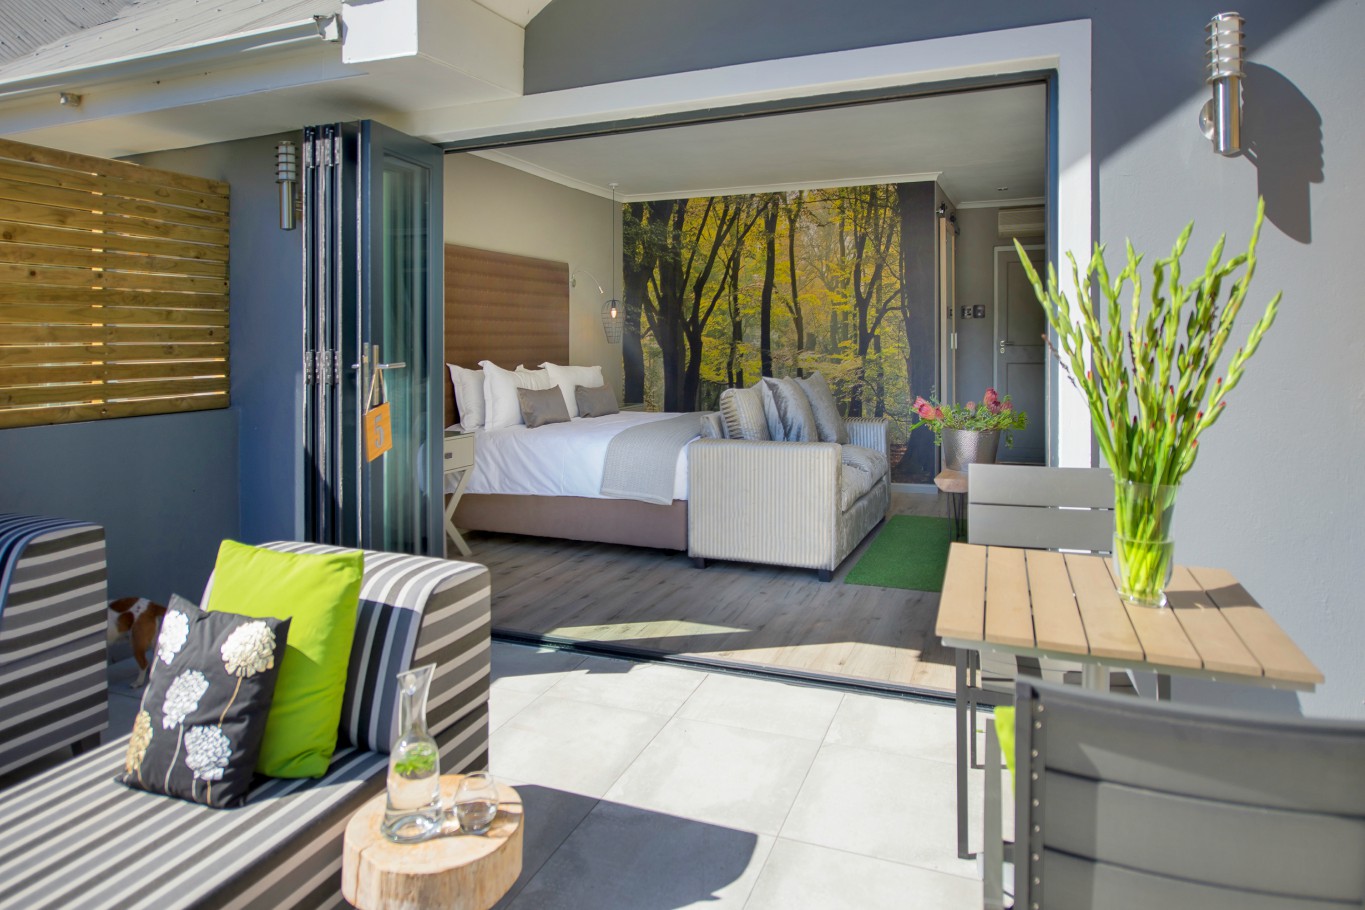 The luxury garden suite has large folding doors that lead to a charming private patio.